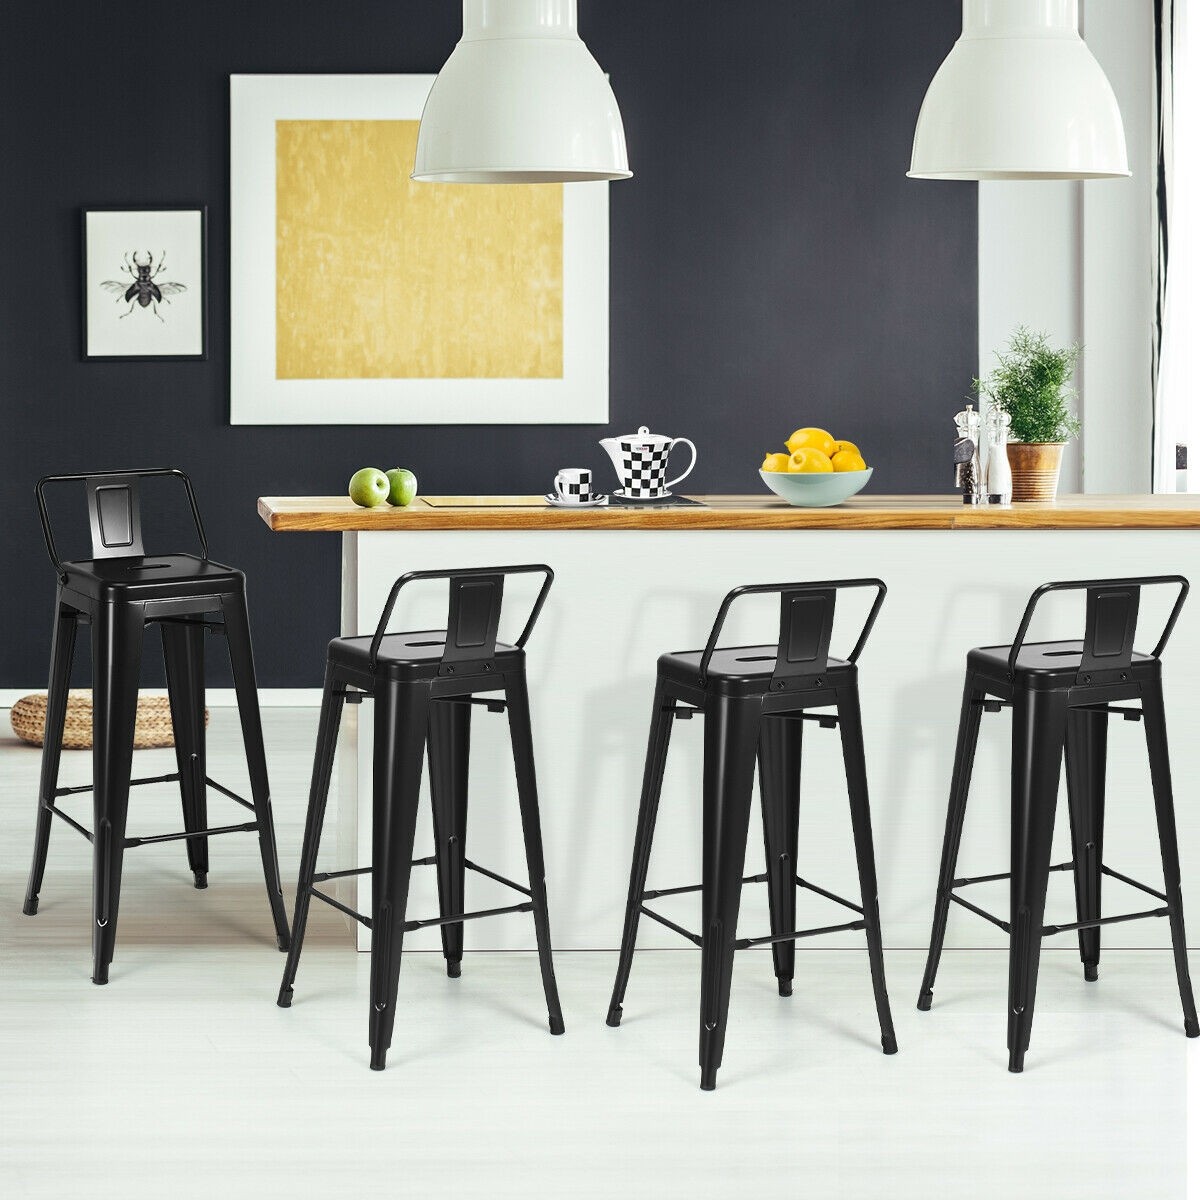 30 In. Set Of 4 Metal Height Barstools With Low Back